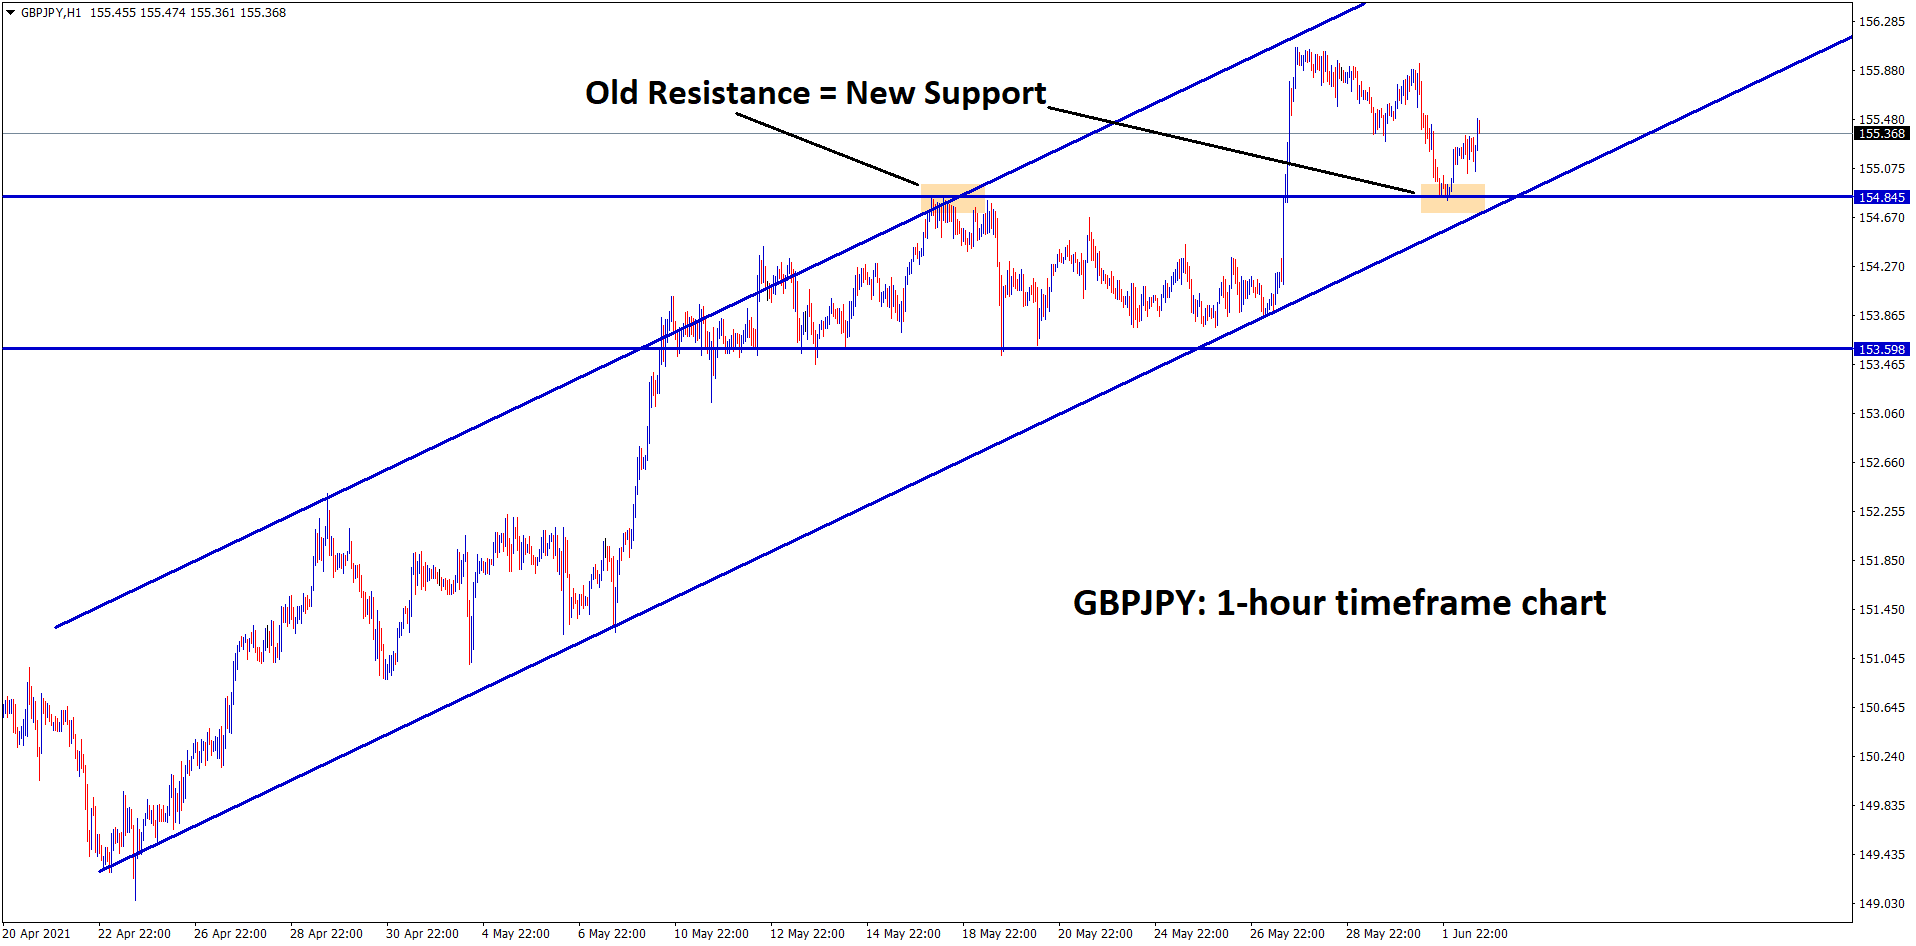 GBPJPY moving in an uptrend recently market has retested the broken previous resistance which act as a new support now.